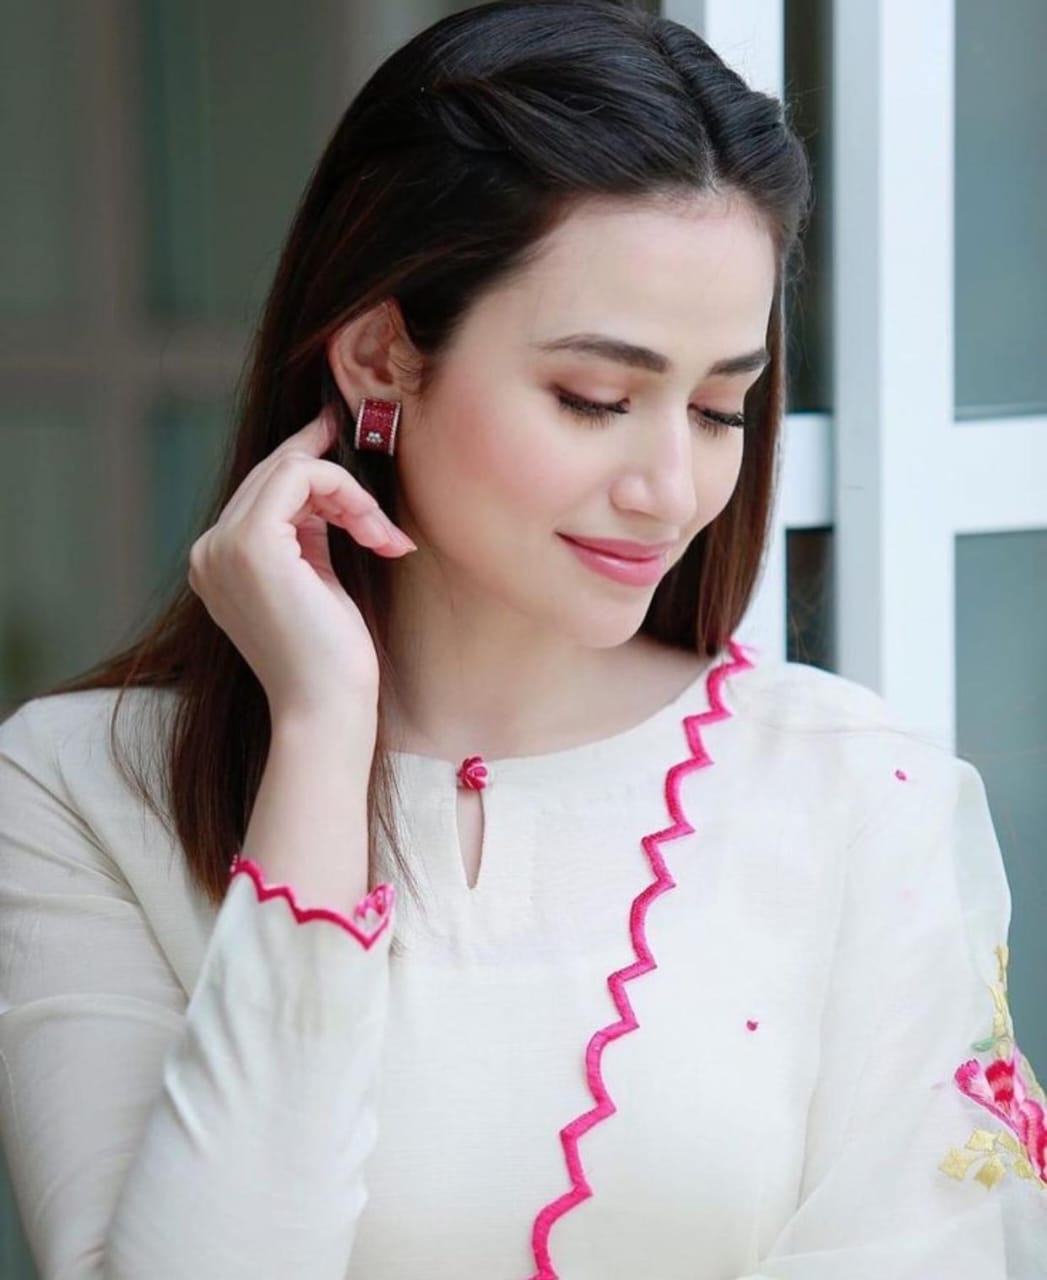 Off-White Poly Silk Kurta With Pant And Dupatta